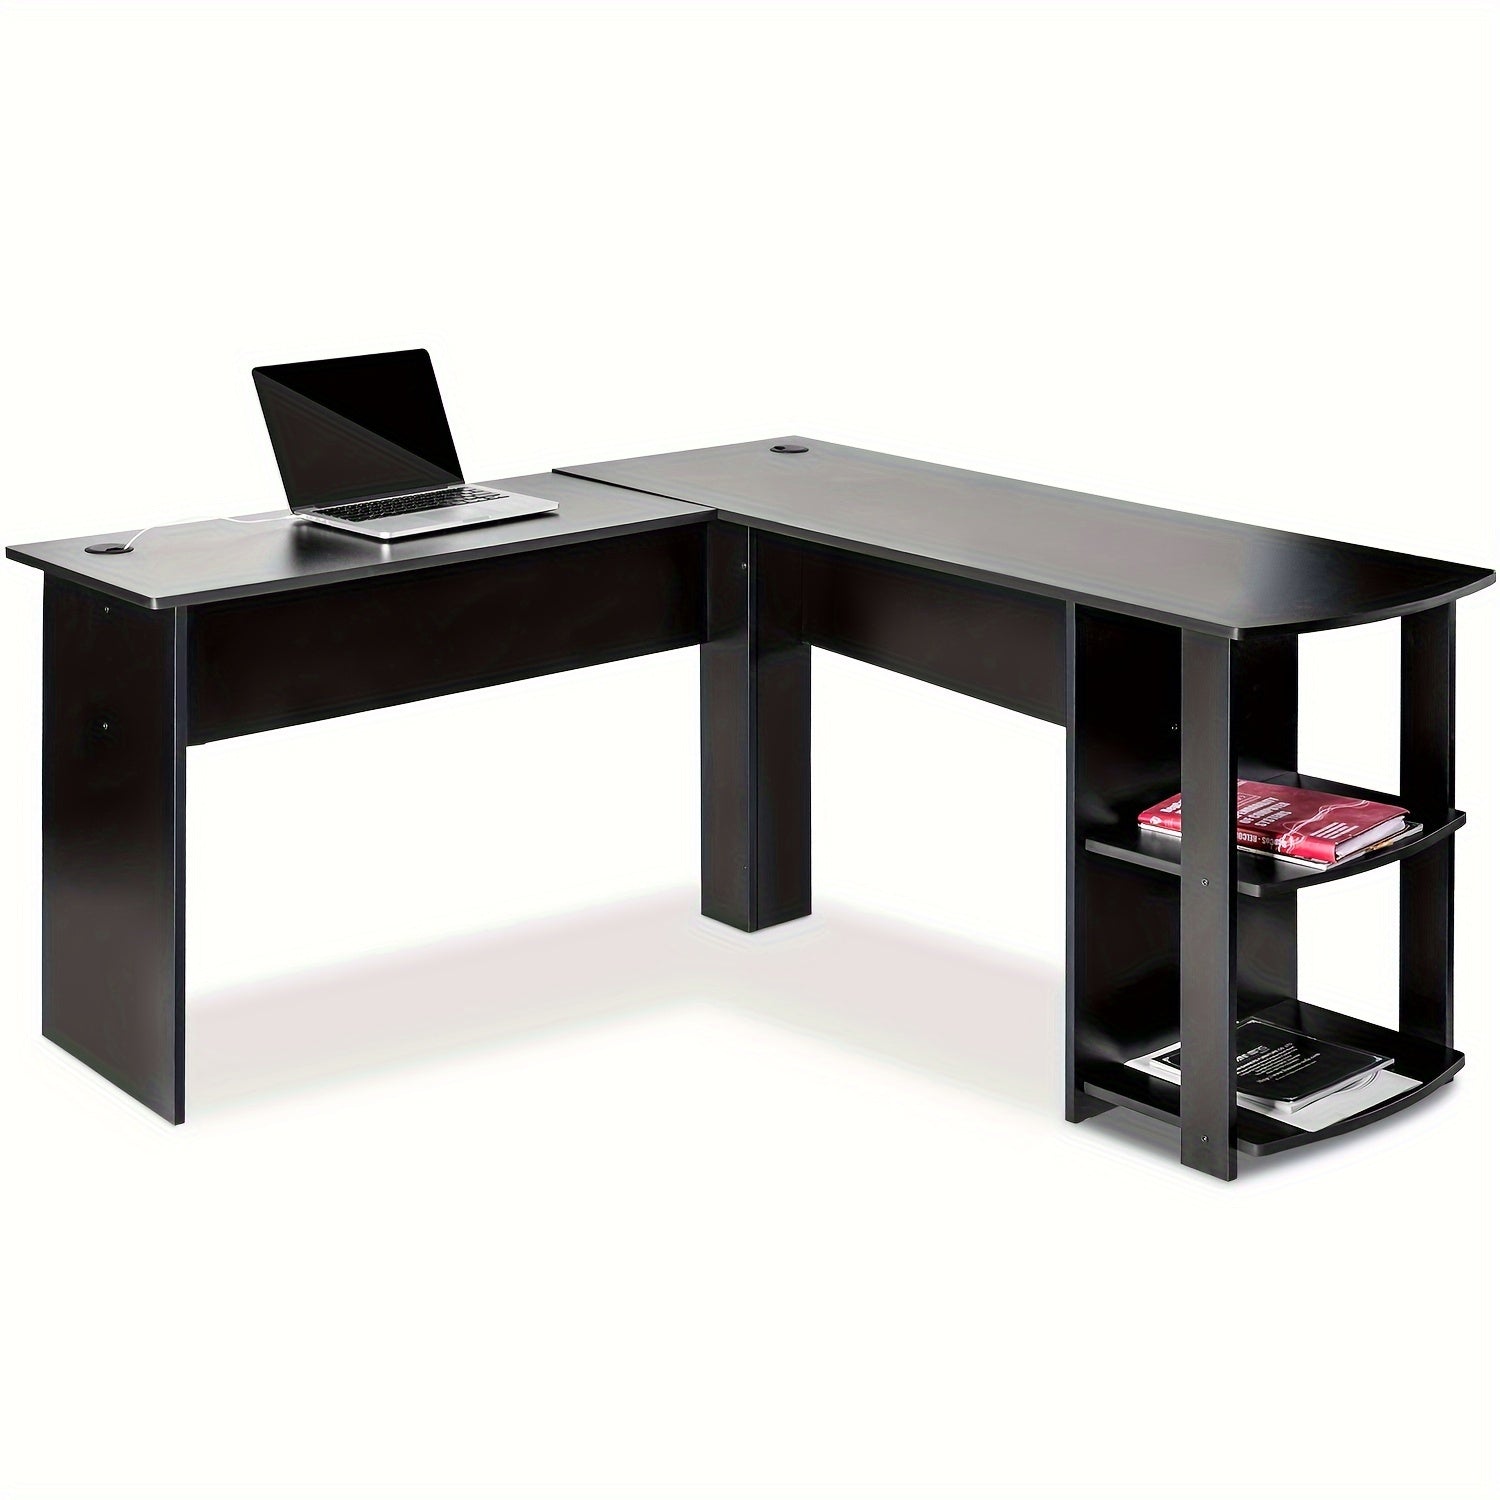 1pc L - shaped office desk with file shelf, corner computer desk with power socket, home office desk with storage cabinet, Black - Ammpoure Wellbeing